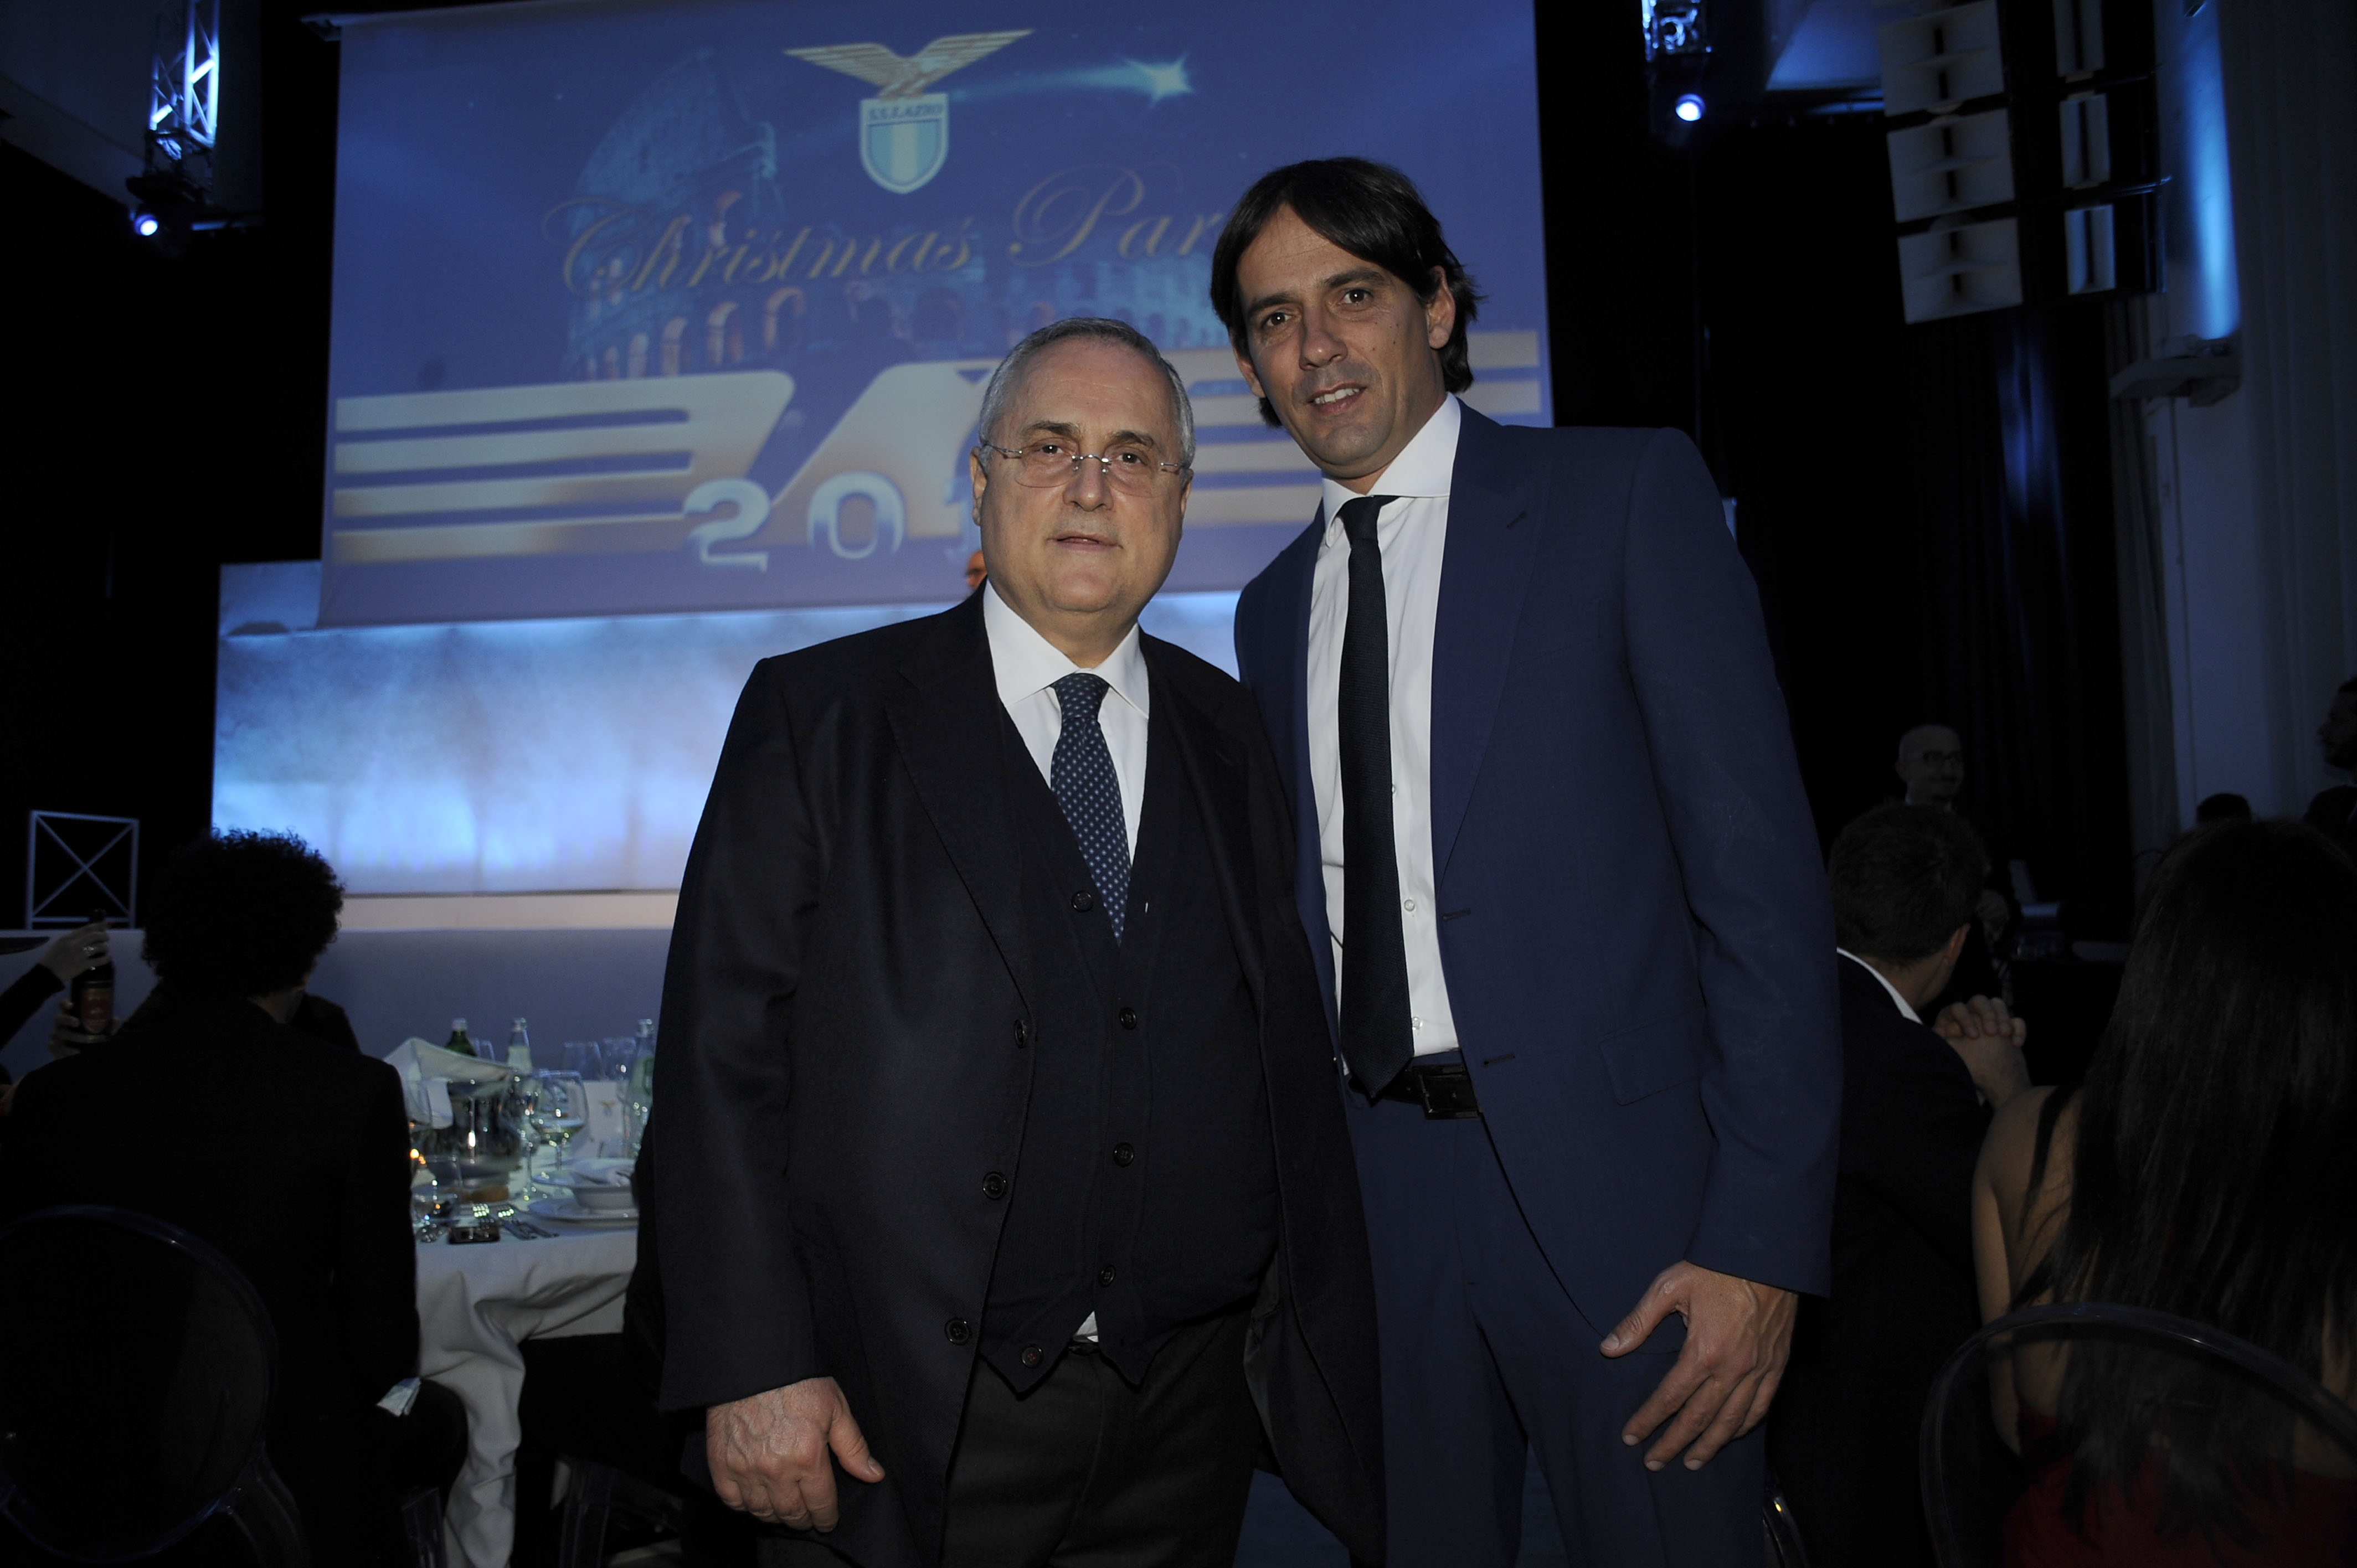 ROME, ITALY - DECEMBER 19:  SS Lazio Presidenti Claudio Lotito and SS Lazio head coach Simone Inzaghi pose during the SS Lazio Christmas Party on December 19, 2017 in Rome, Italy.  (Photo by Marco Rosi/Getty Images)